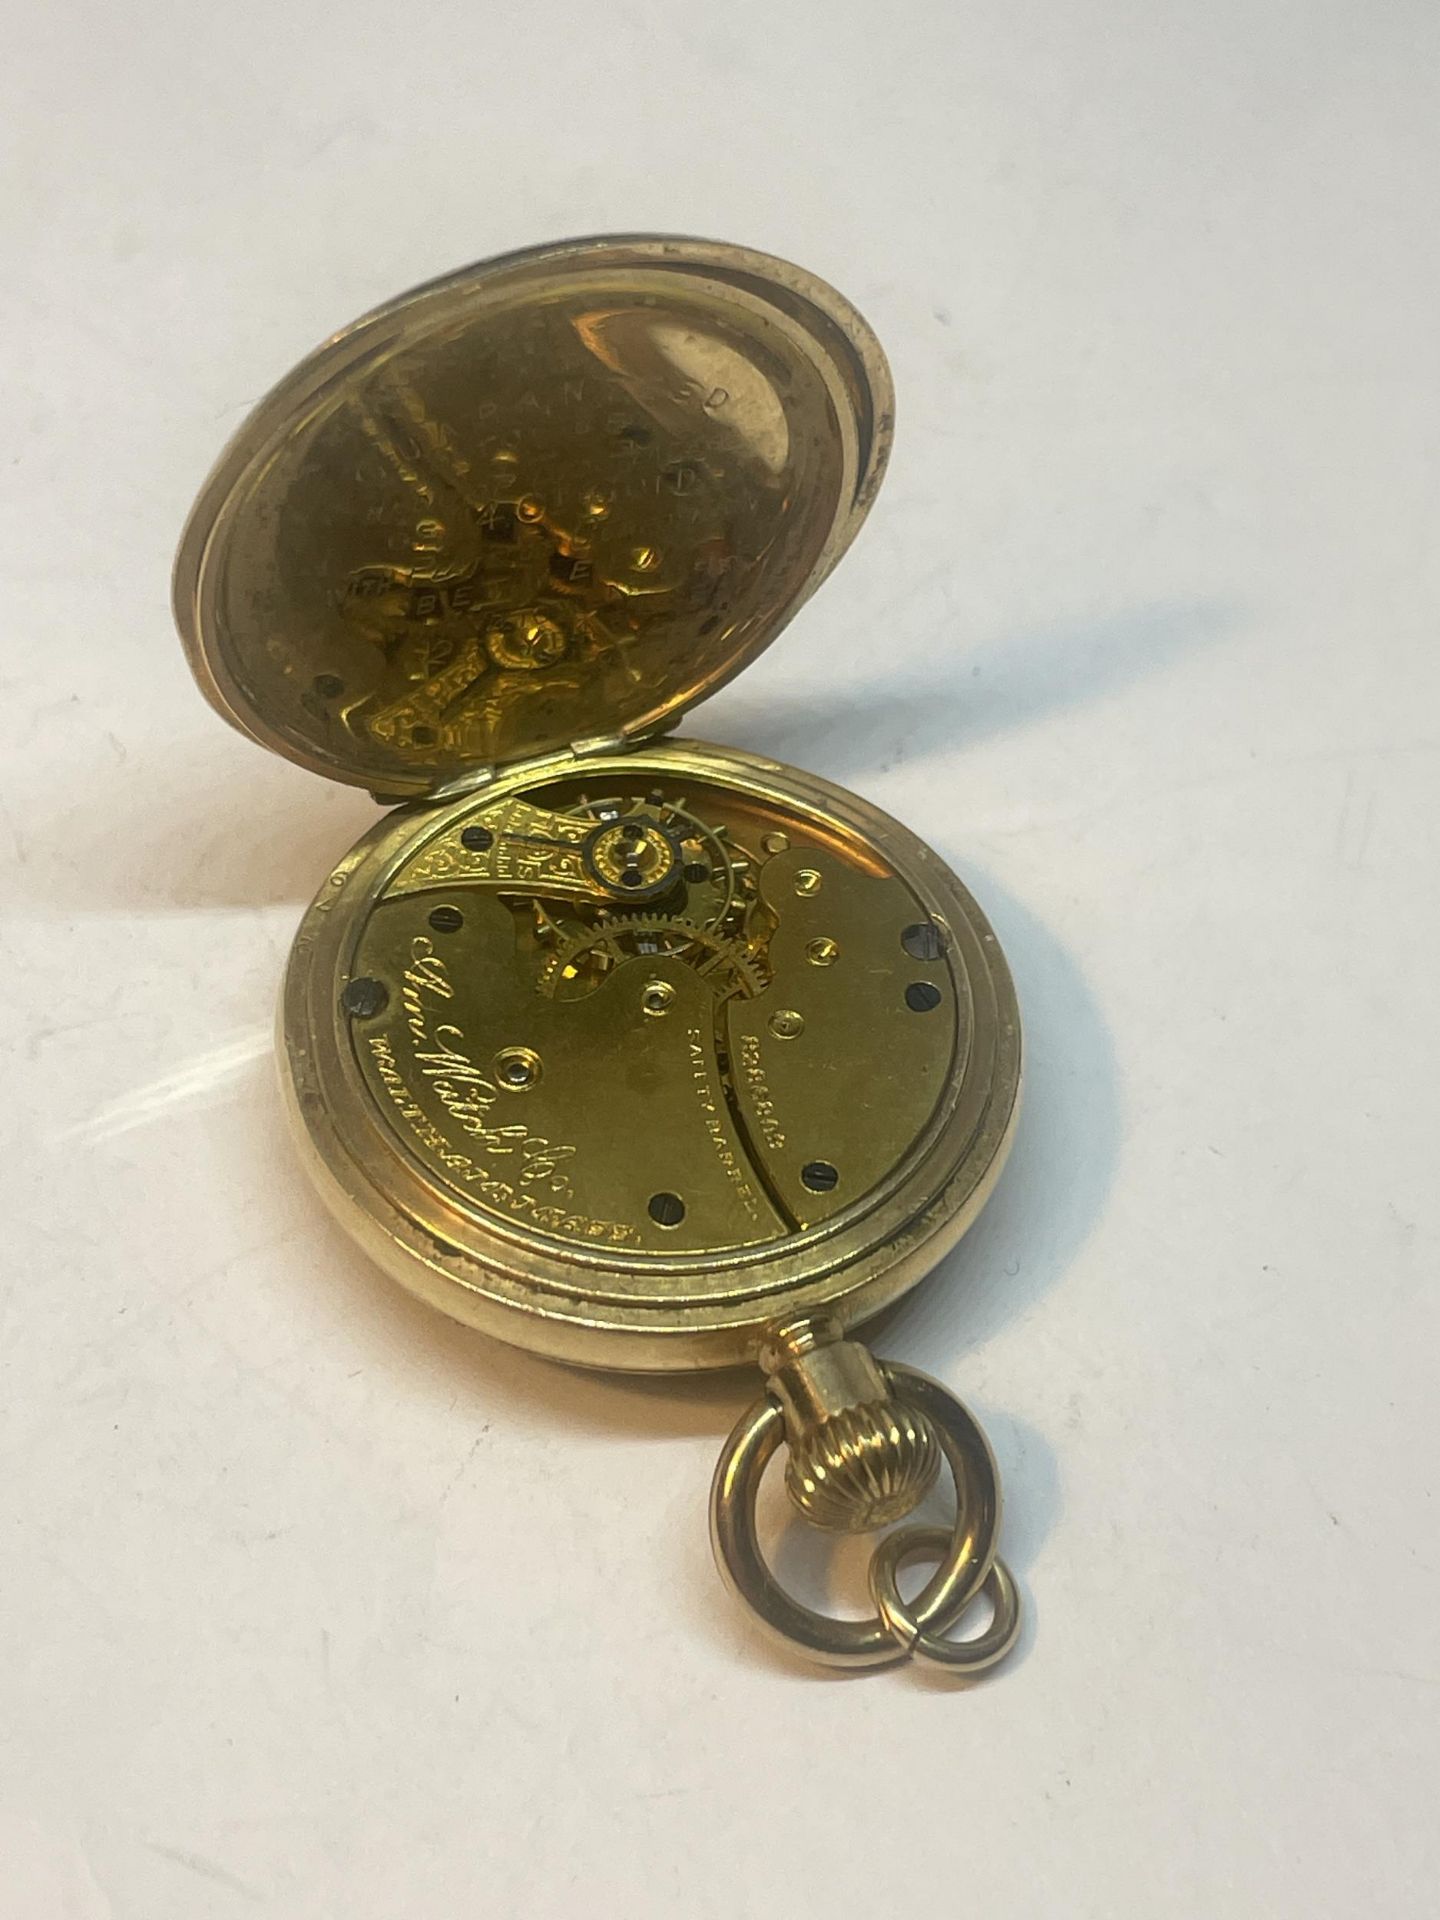 A 14CT GOLD LADIES OPEN FACED POCKET WATCH GROSS WEIGHT 40.20 GRAMS - Image 5 of 8